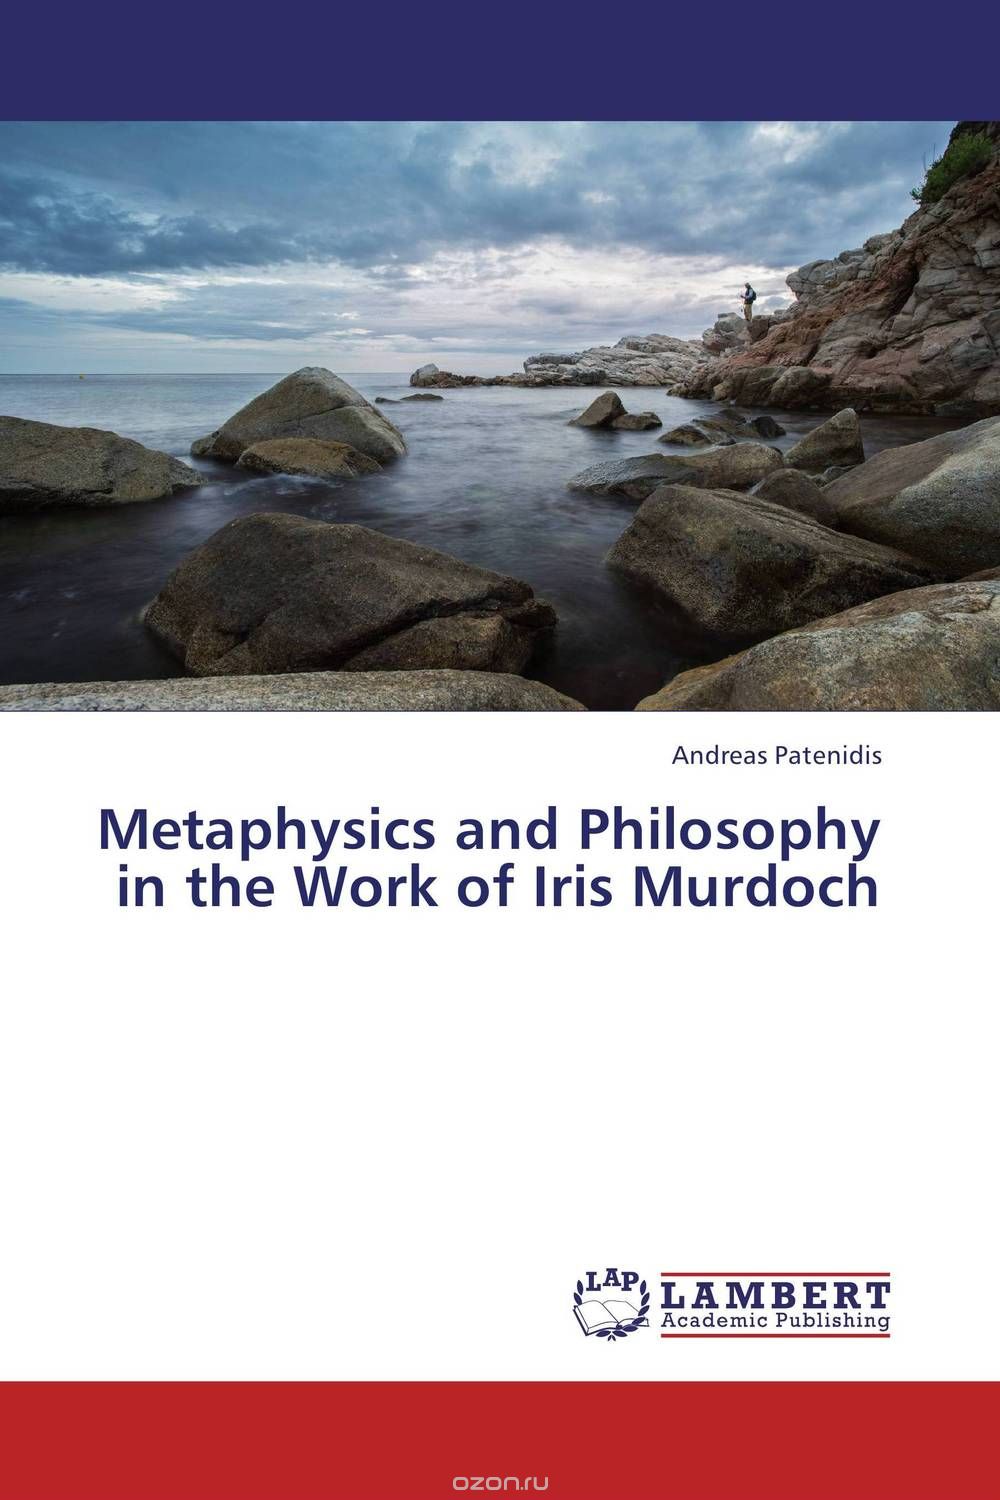 Metaphysics and Philosophy in the Work of Iris Murdoch